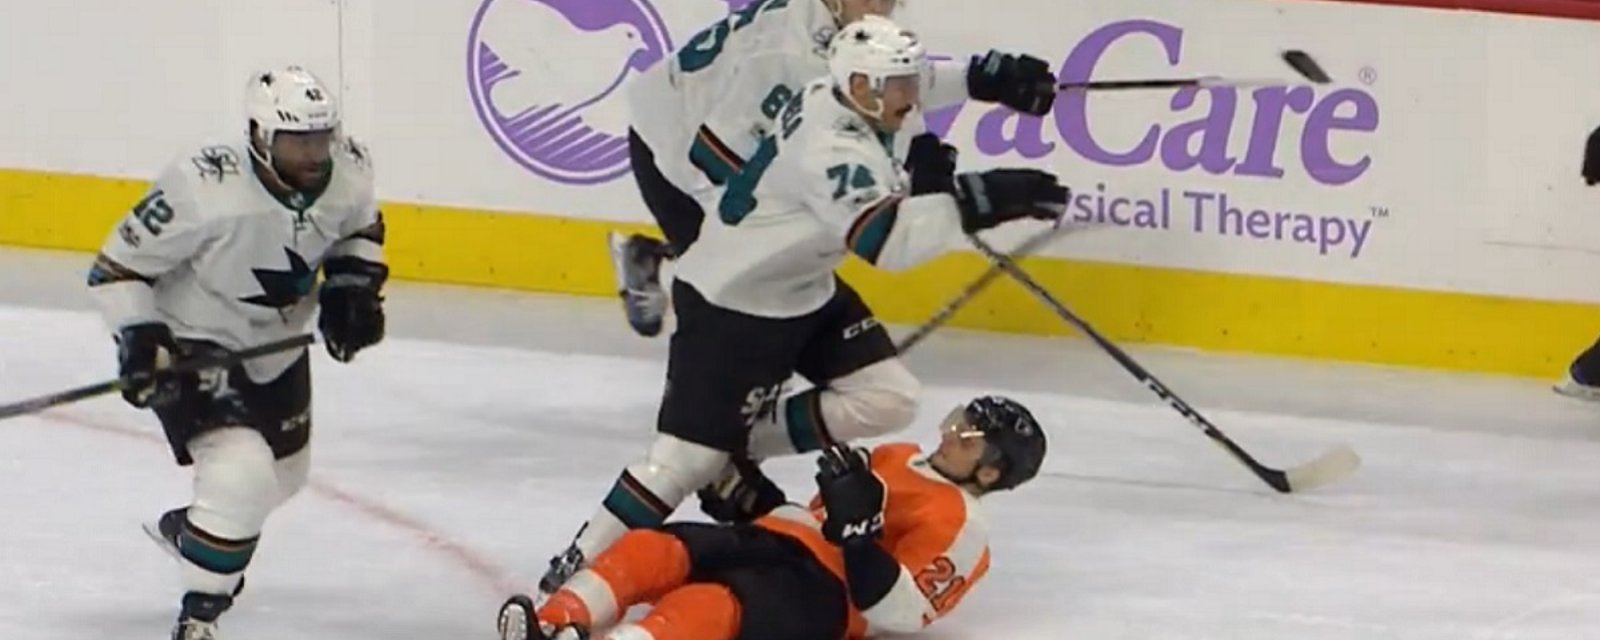 Laughton injured after taking a questionable hit and a knee to the head.